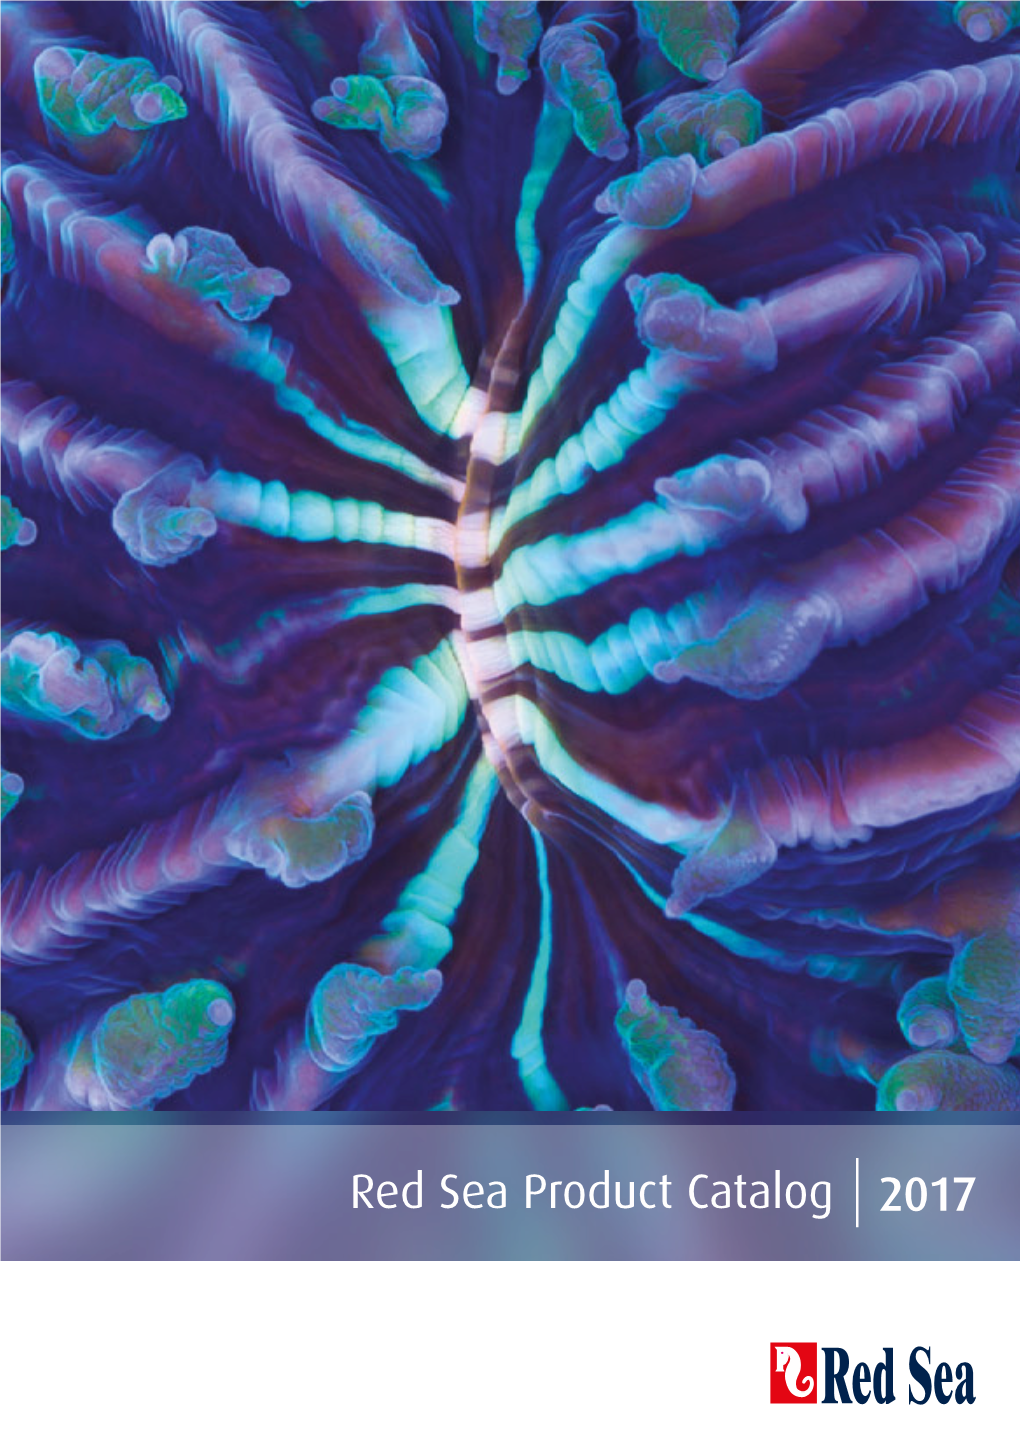 Red Sea Product Catalog 2017 Welcome to Red Sea